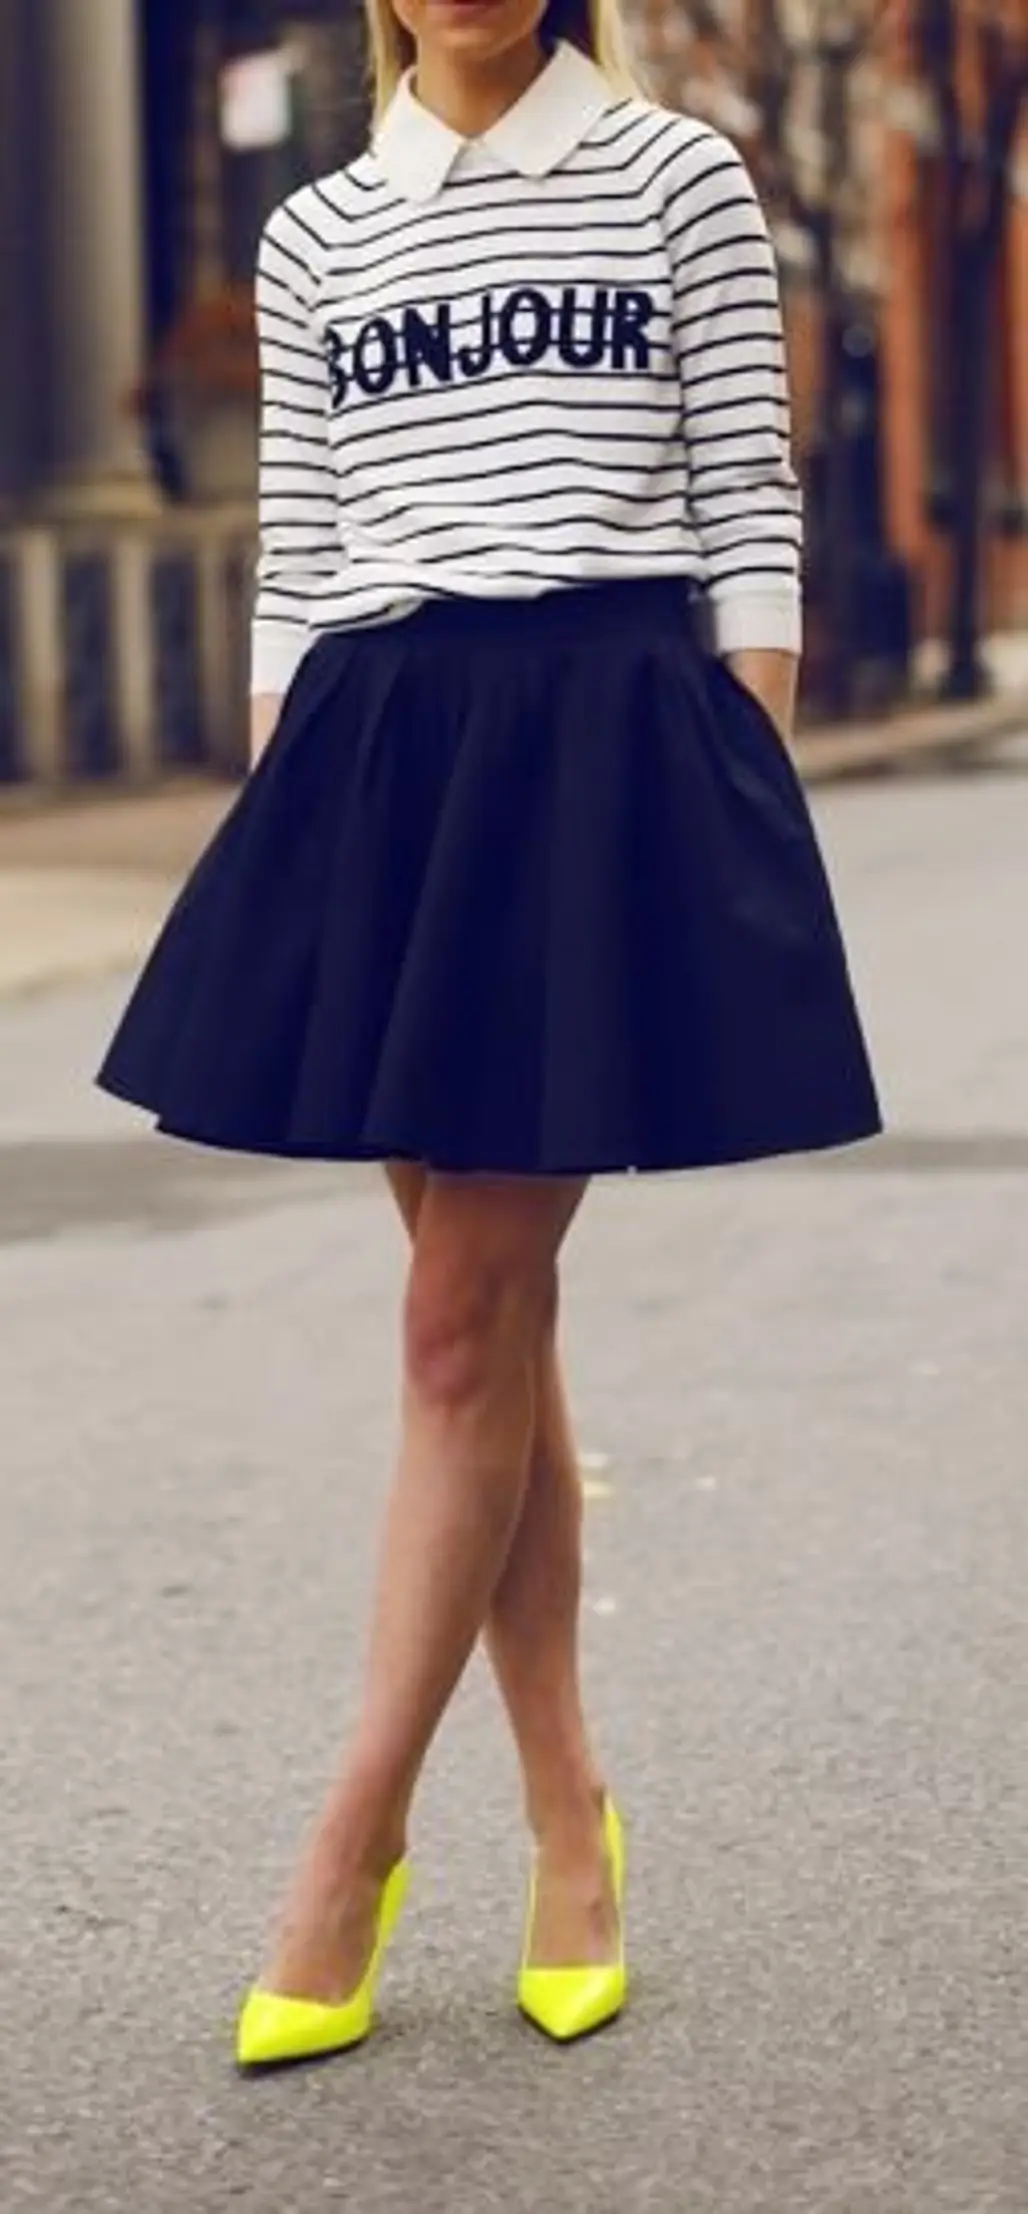 With a Skirt